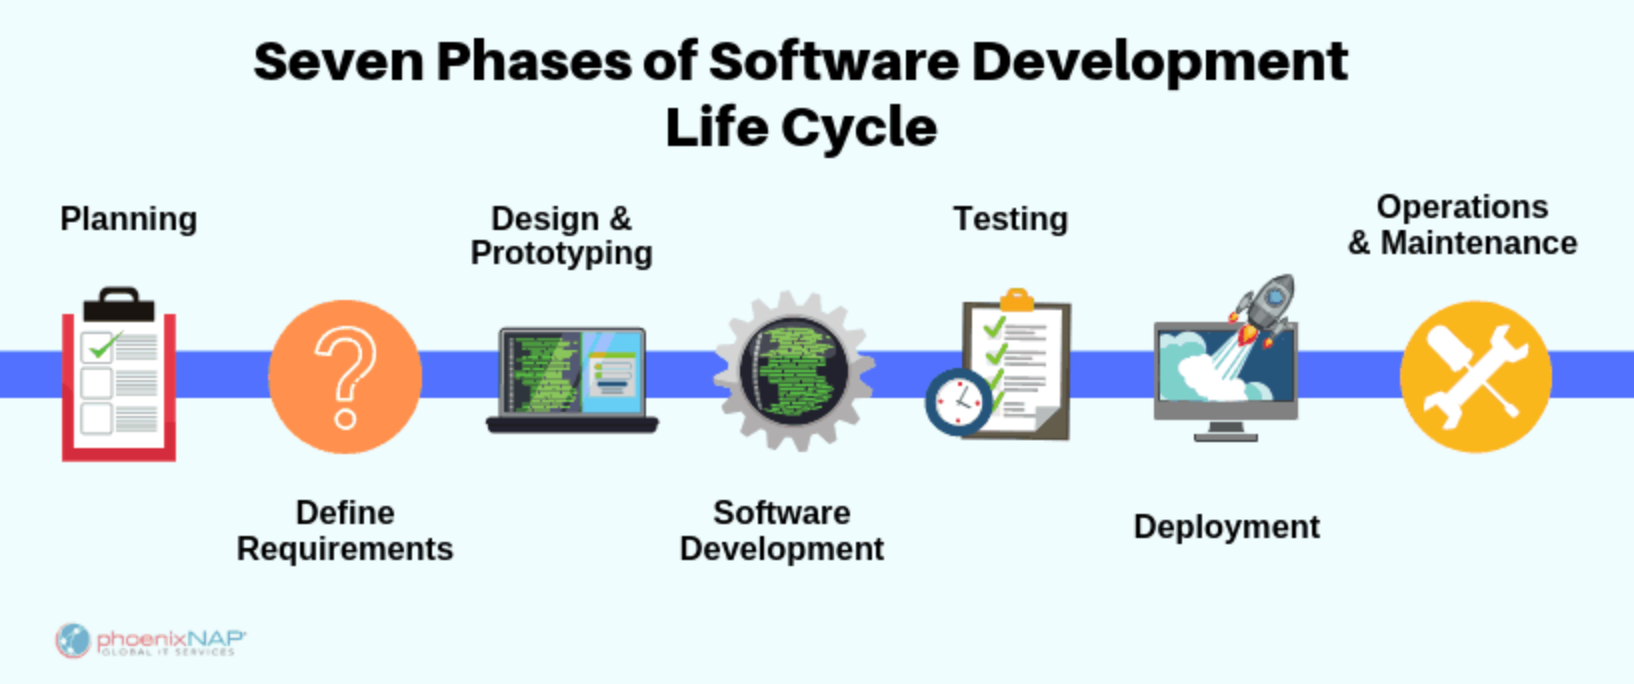 7 phases of Software Development Life Cycle